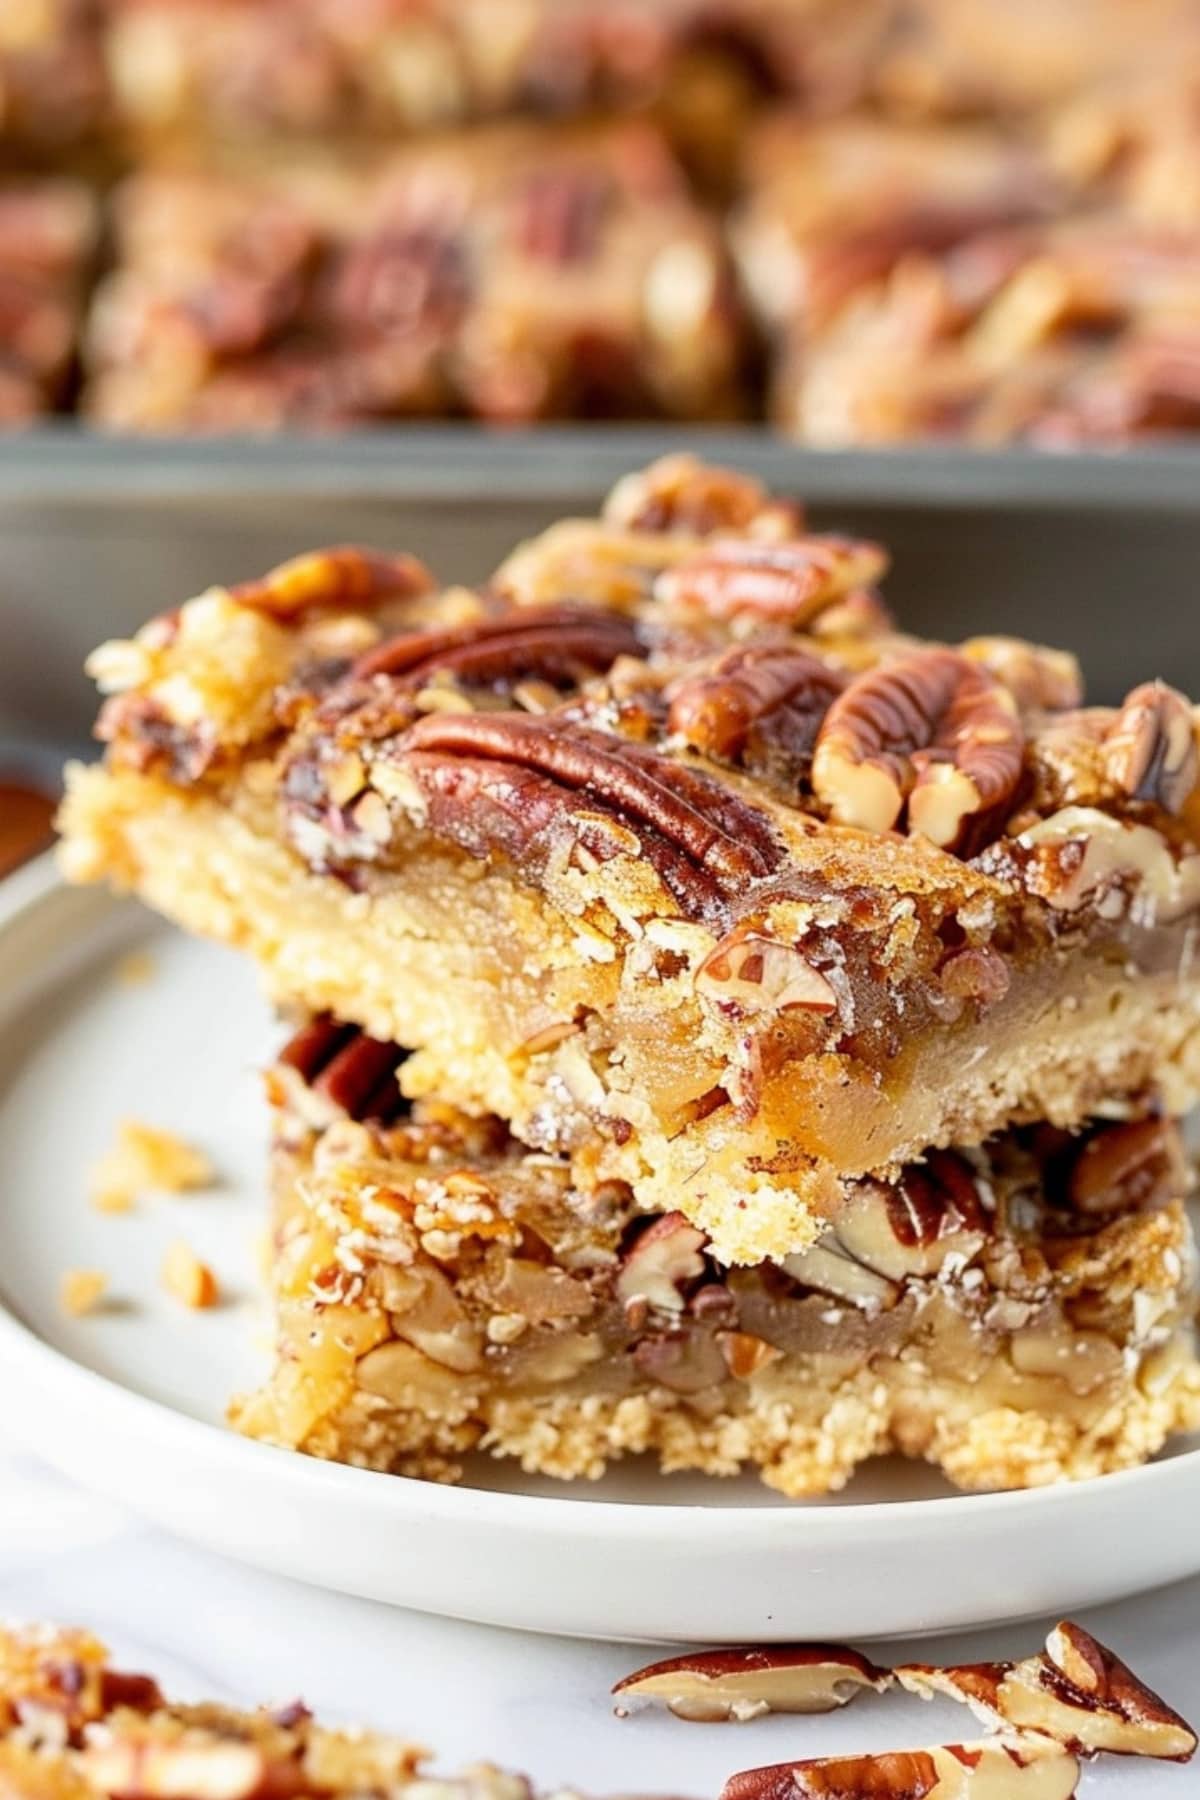 Slices of caramel pecan bars stacked on a white plate.